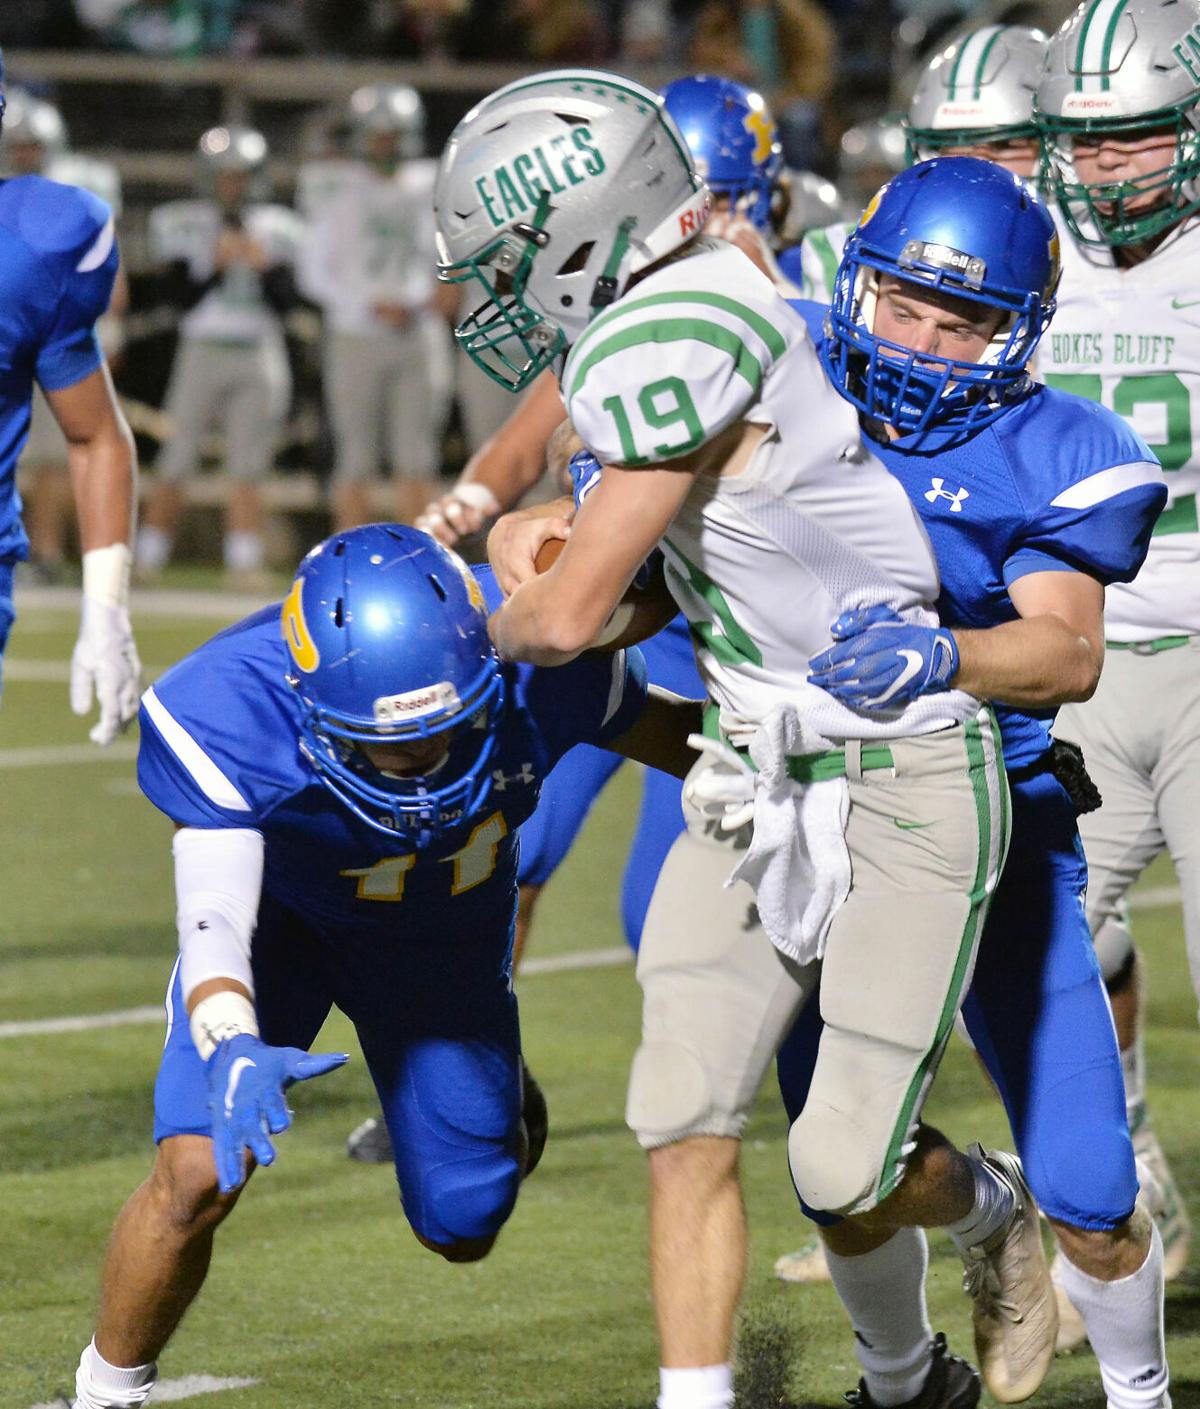 Hokes Bluff At Piedmont Action Slideshows